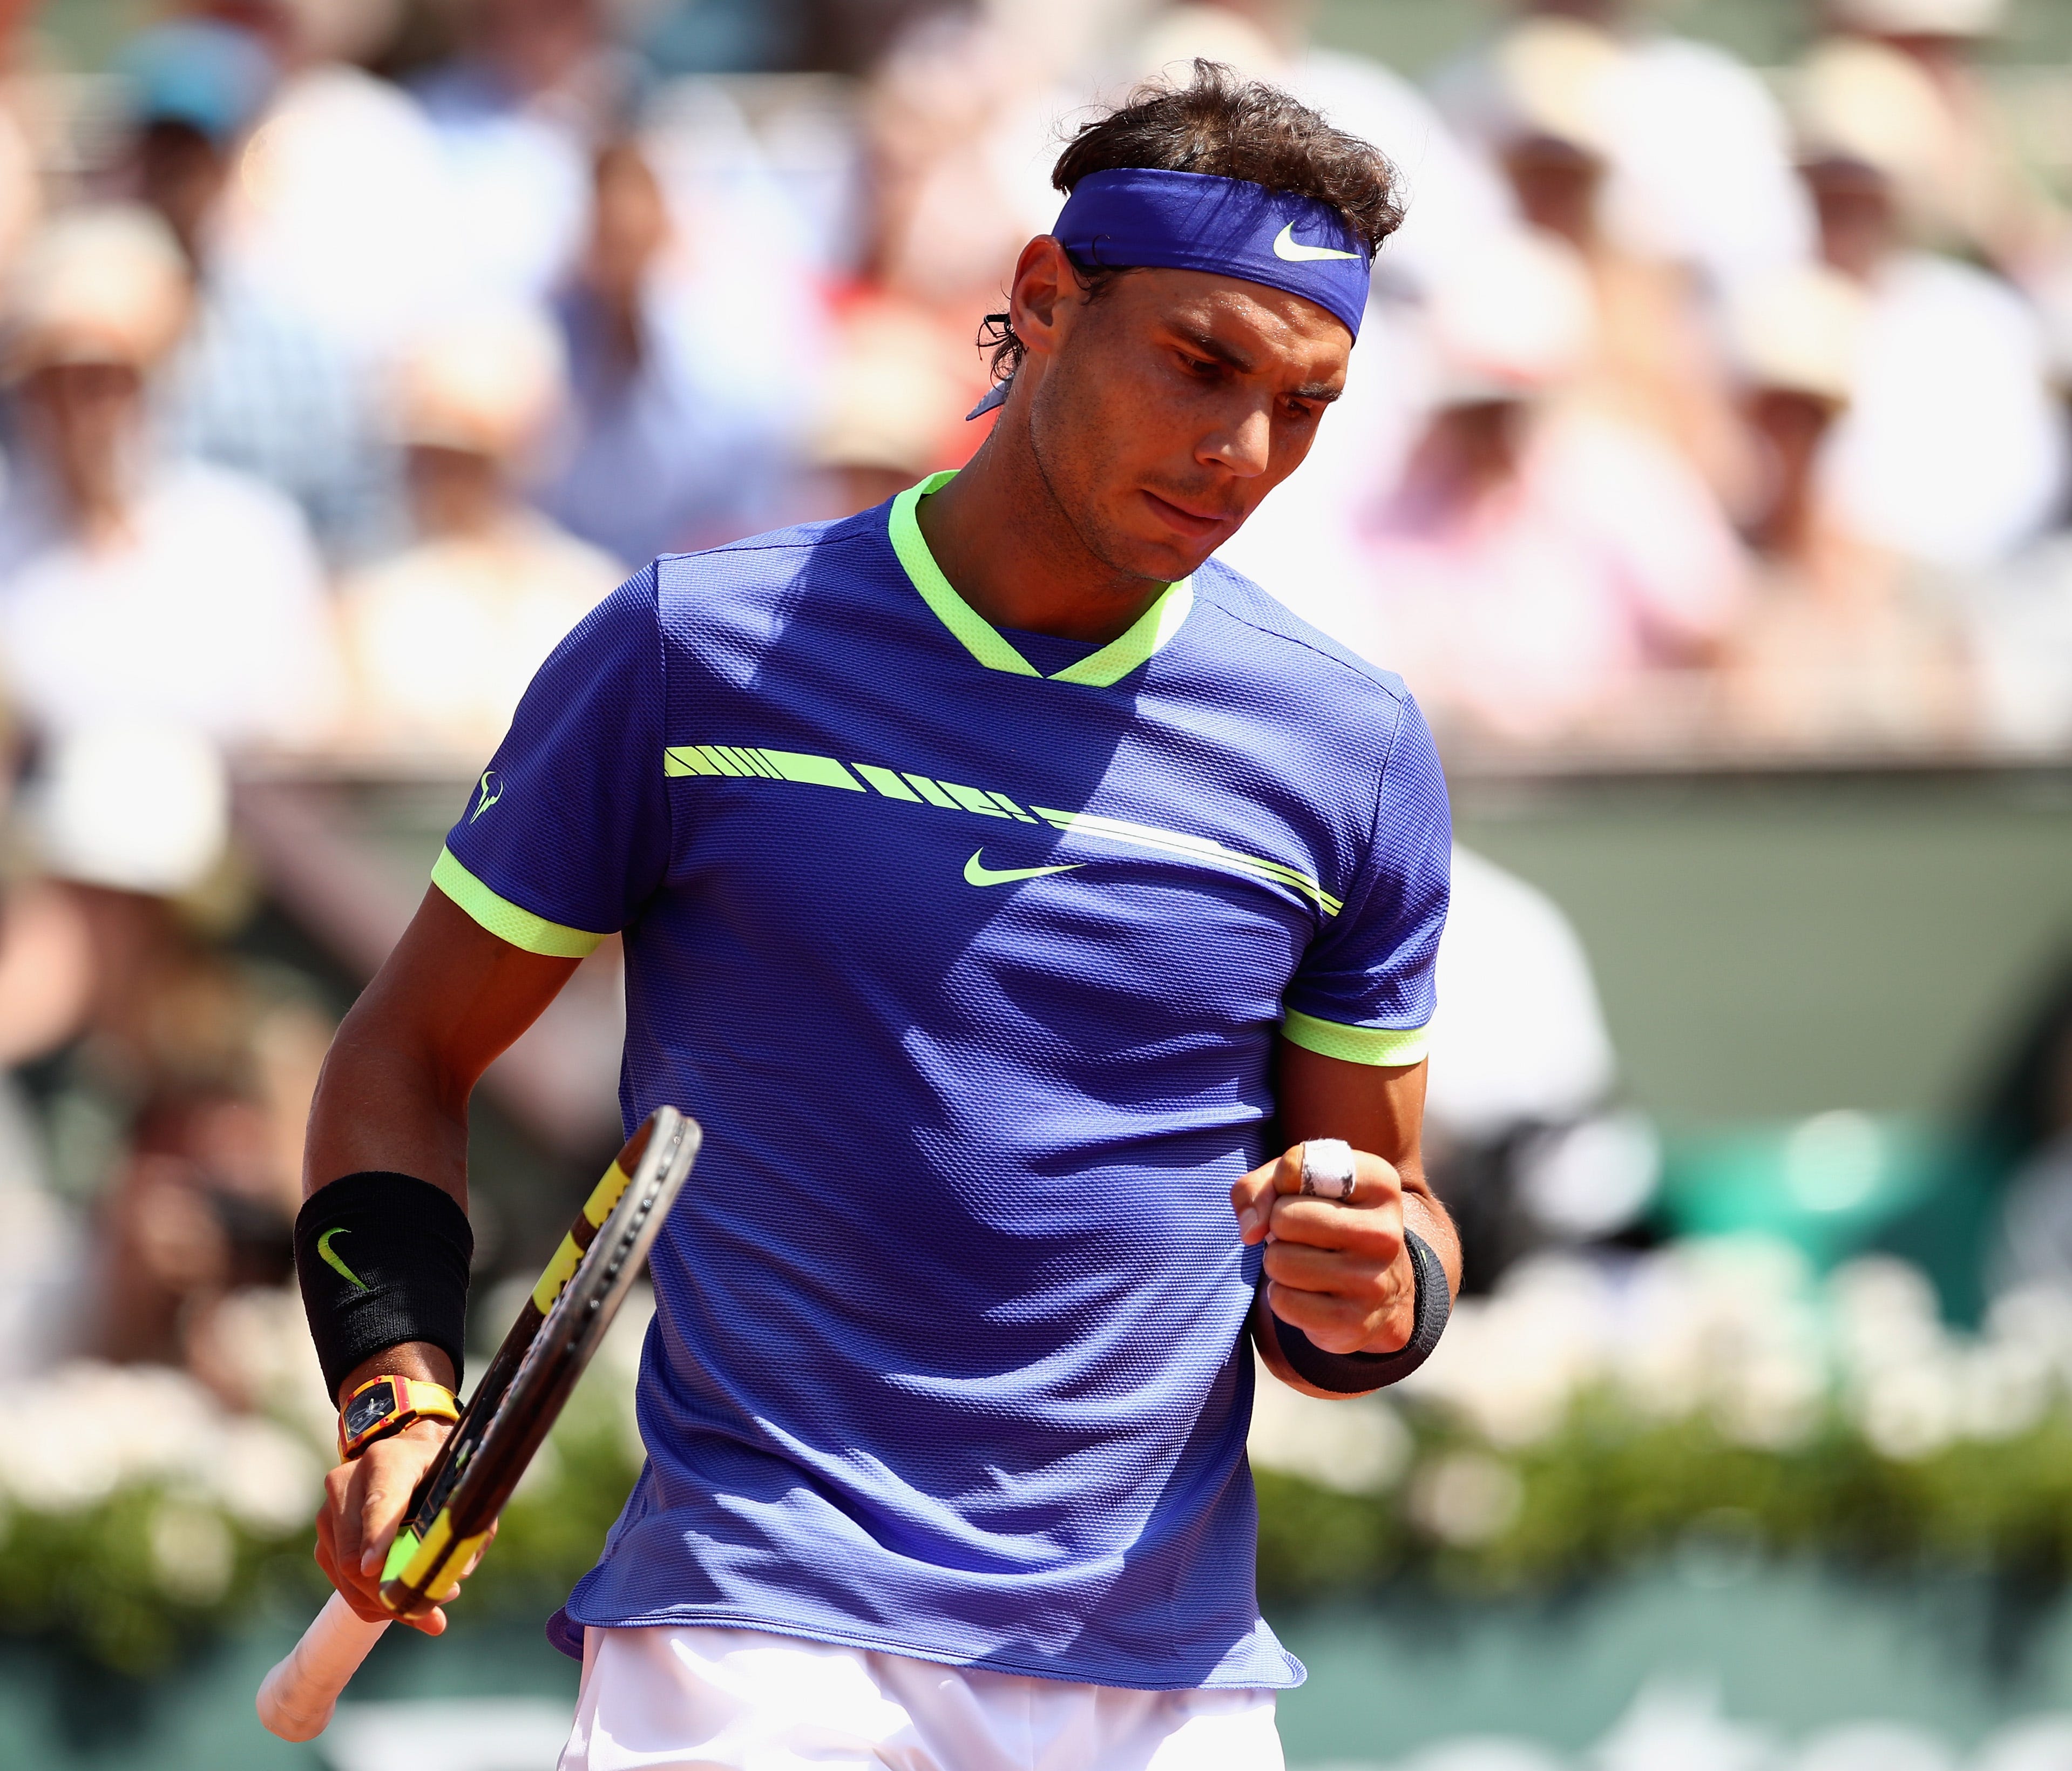 Rafael Nadal of Spain celebrates a point during the men's singles final match against Stan Wawrinka of Switzerland on day fifteen of the 2017 French Open at Roland Garros on June 11.